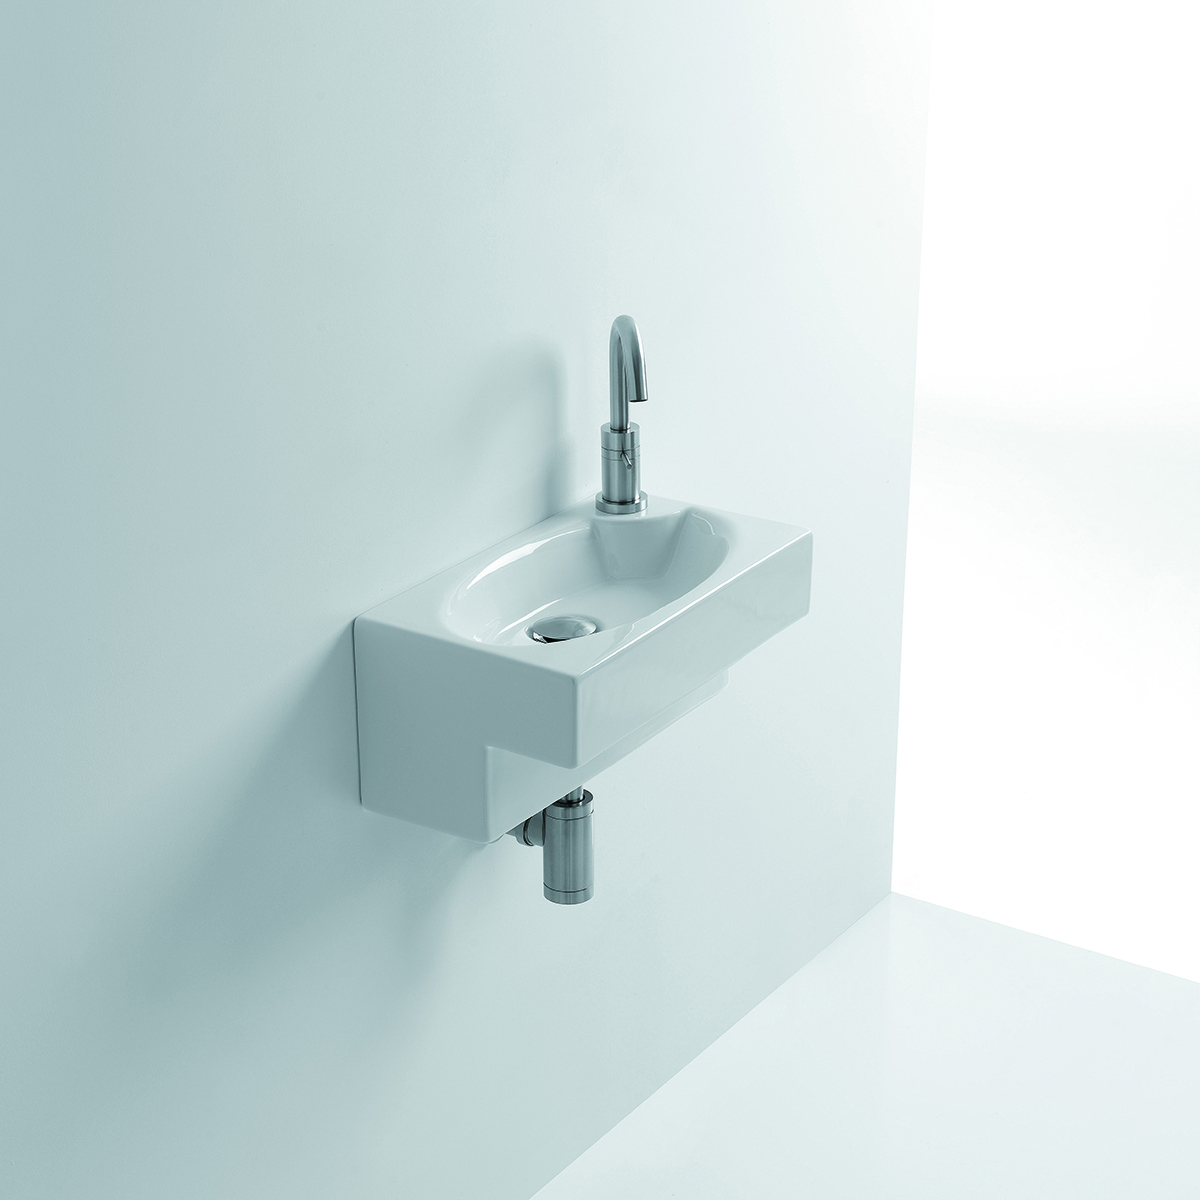 Deca, 17.3 x 9.8 x 7.9, Wall Mounted Bathroom Sink in Ceramic White, Perfect for Small Bathrooms, Made in Italy